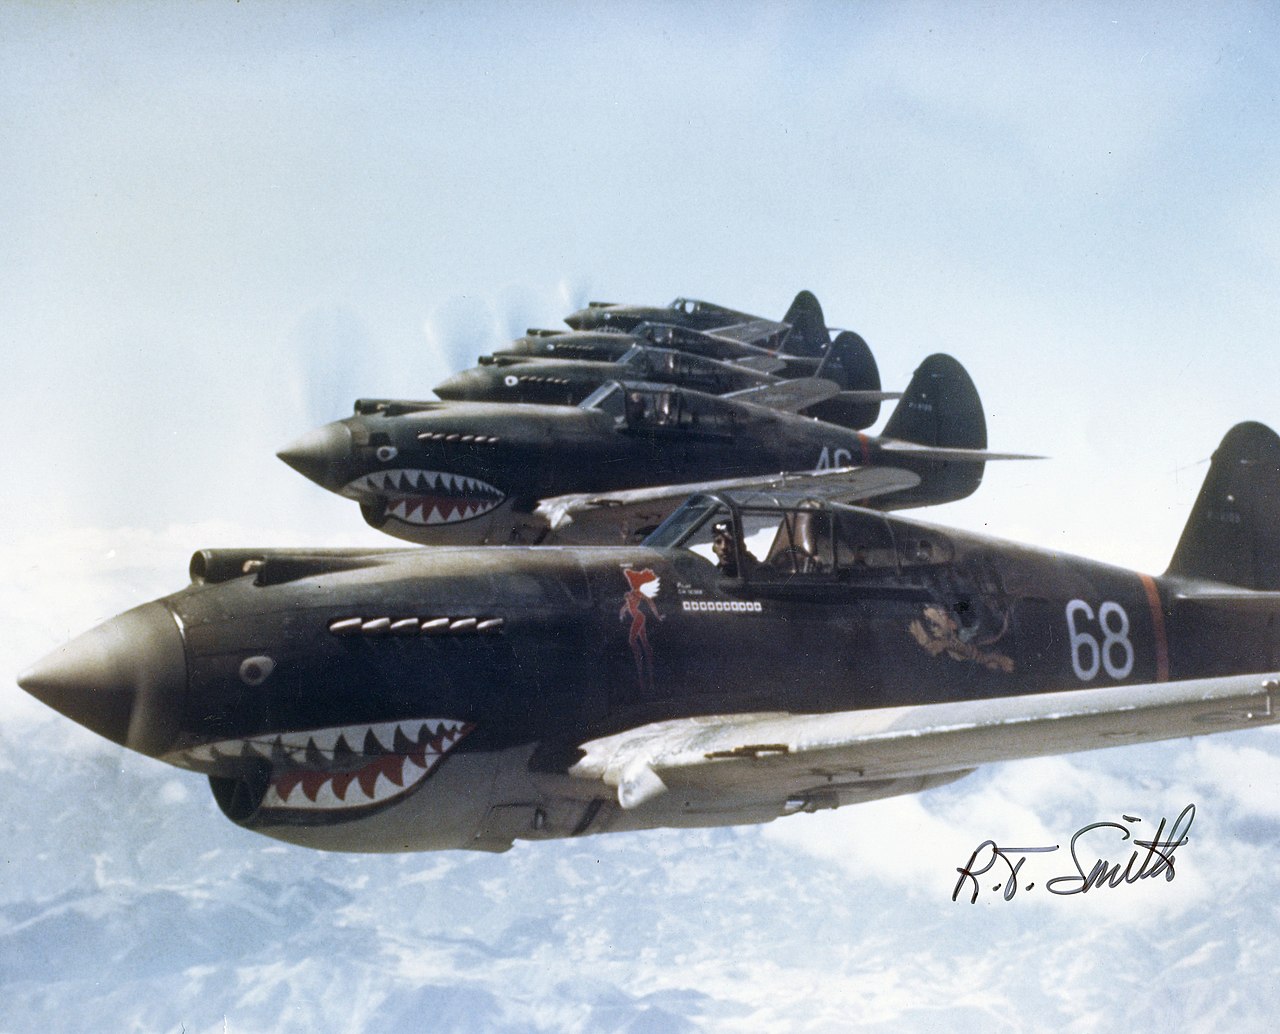 3rd Squadron Hell's Angels, Flying Tigers over China, photographed in 1942